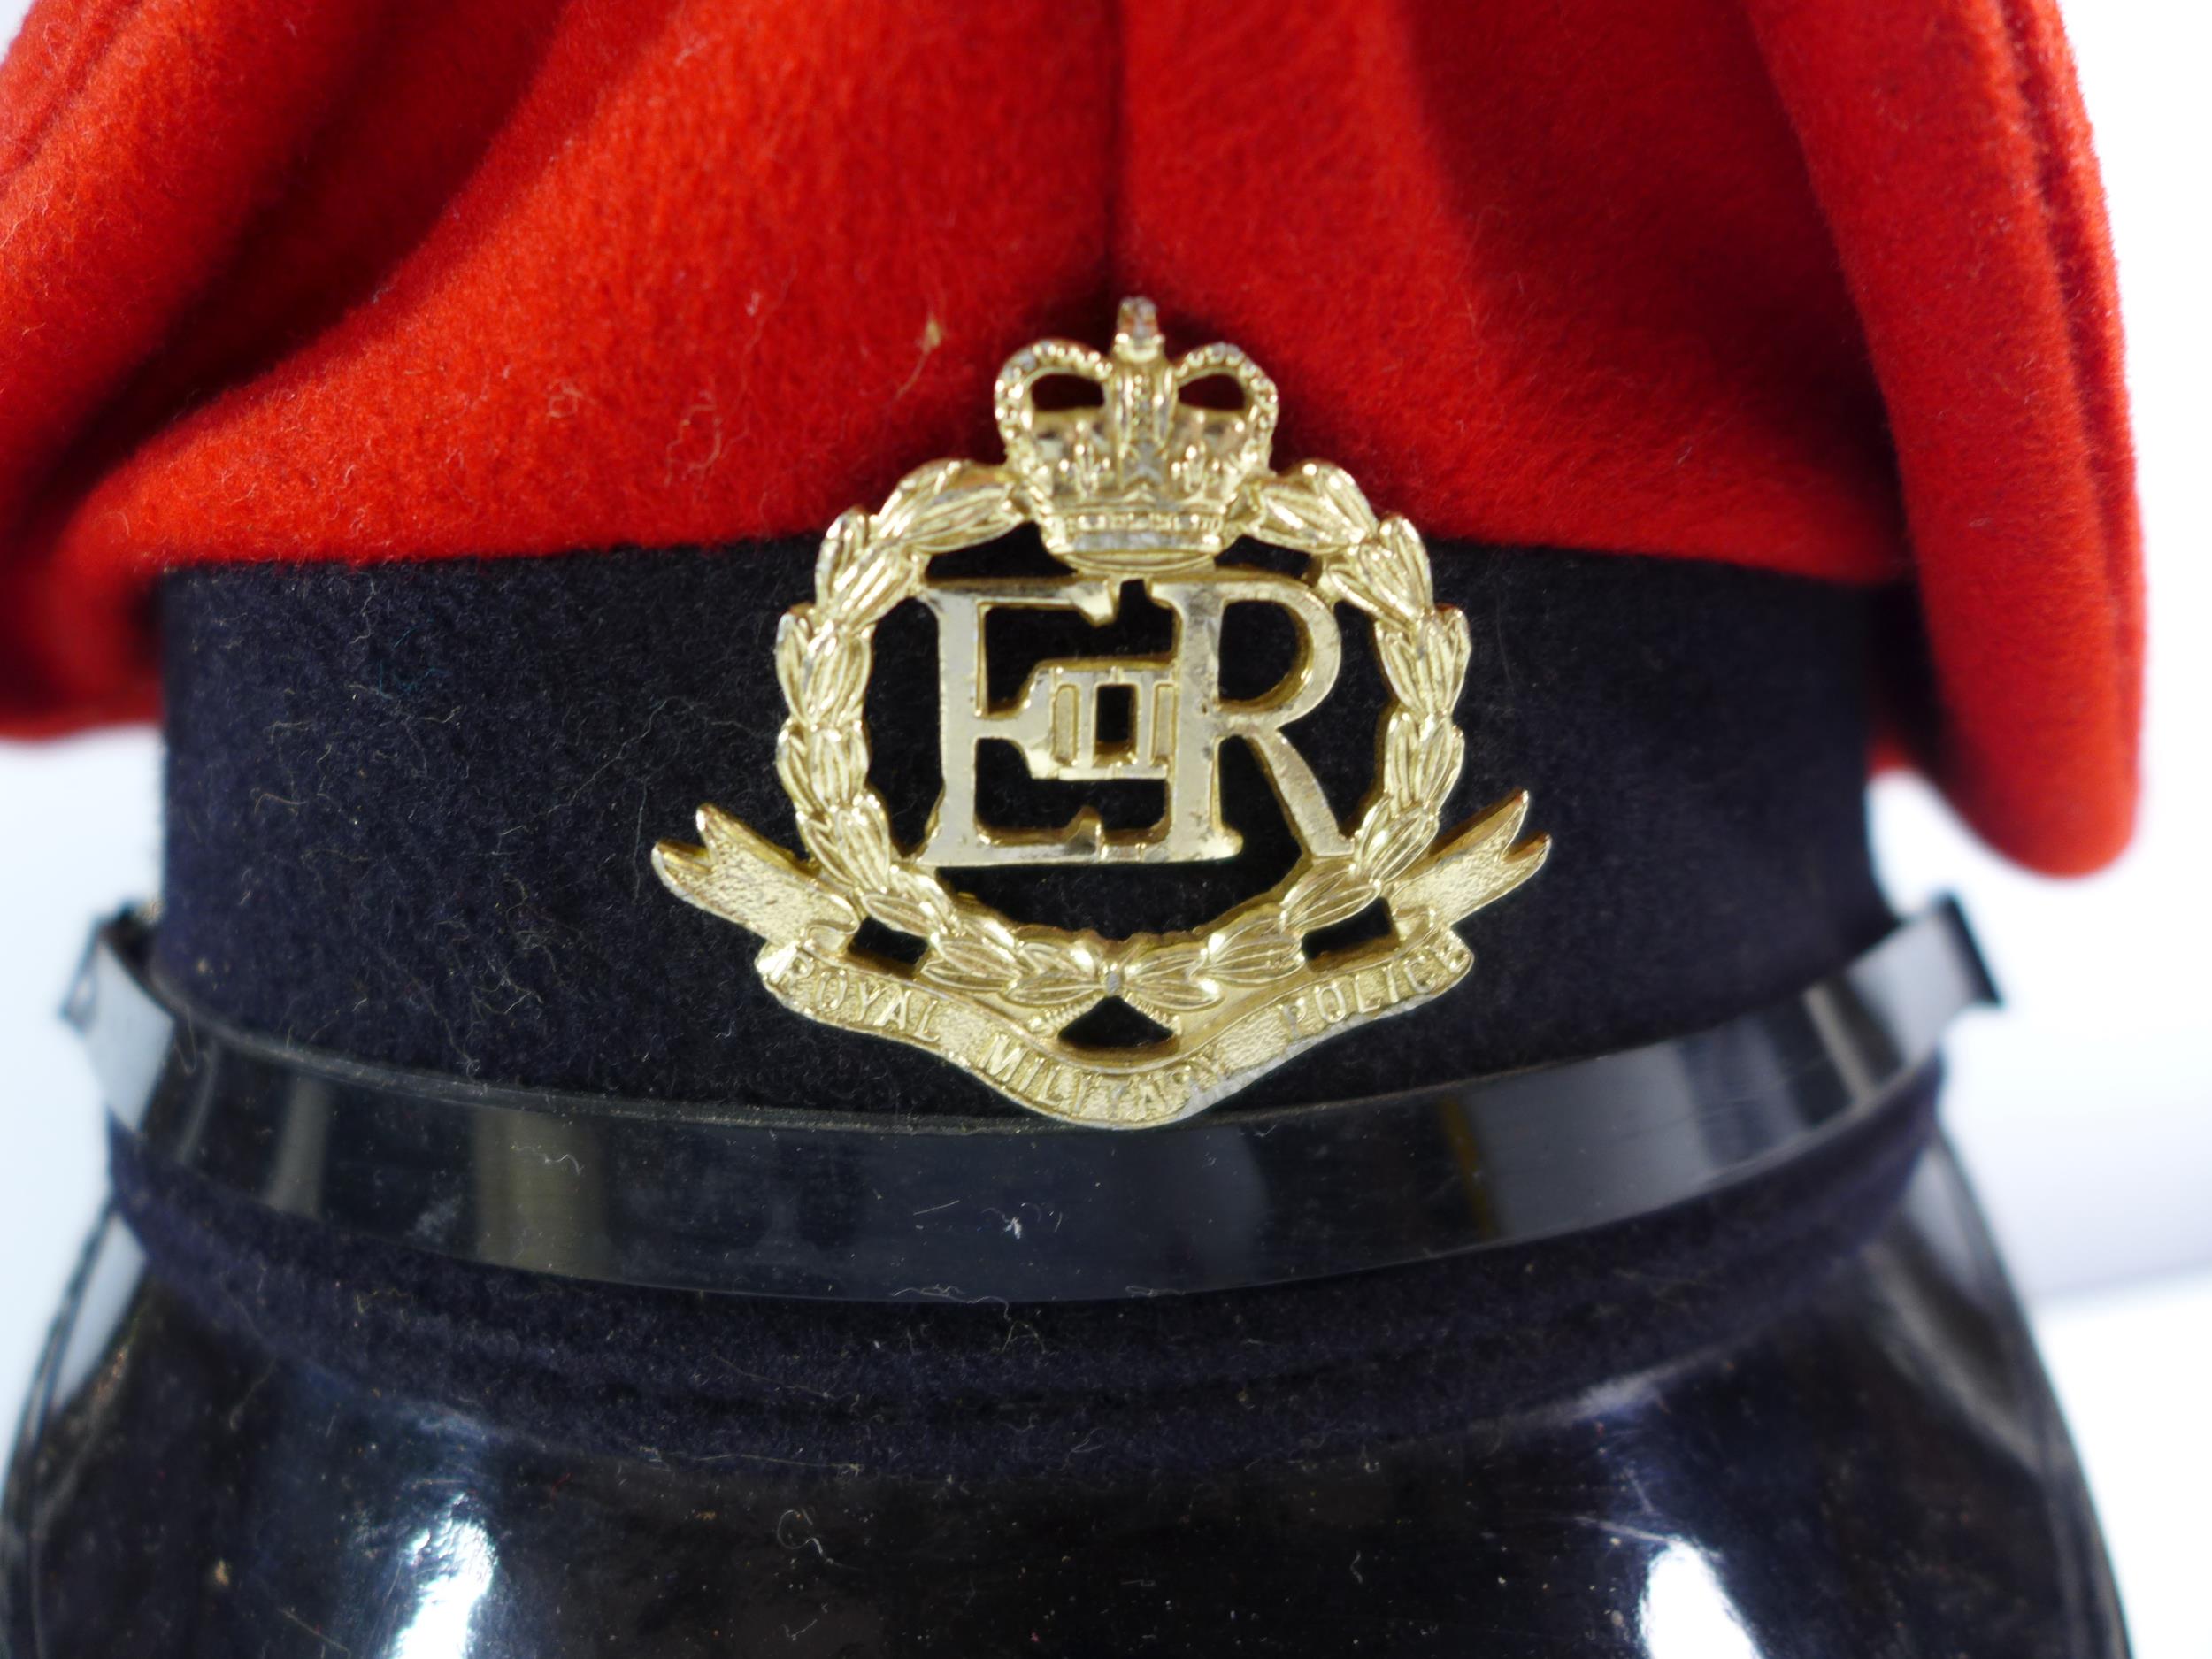 A BRITISH ROYAL MILITARY POLICE PEAKED CAP AND A ROYAL CORP OF SIGNALS PEAKED CAP, SIZE 7 1/4 - Image 2 of 4